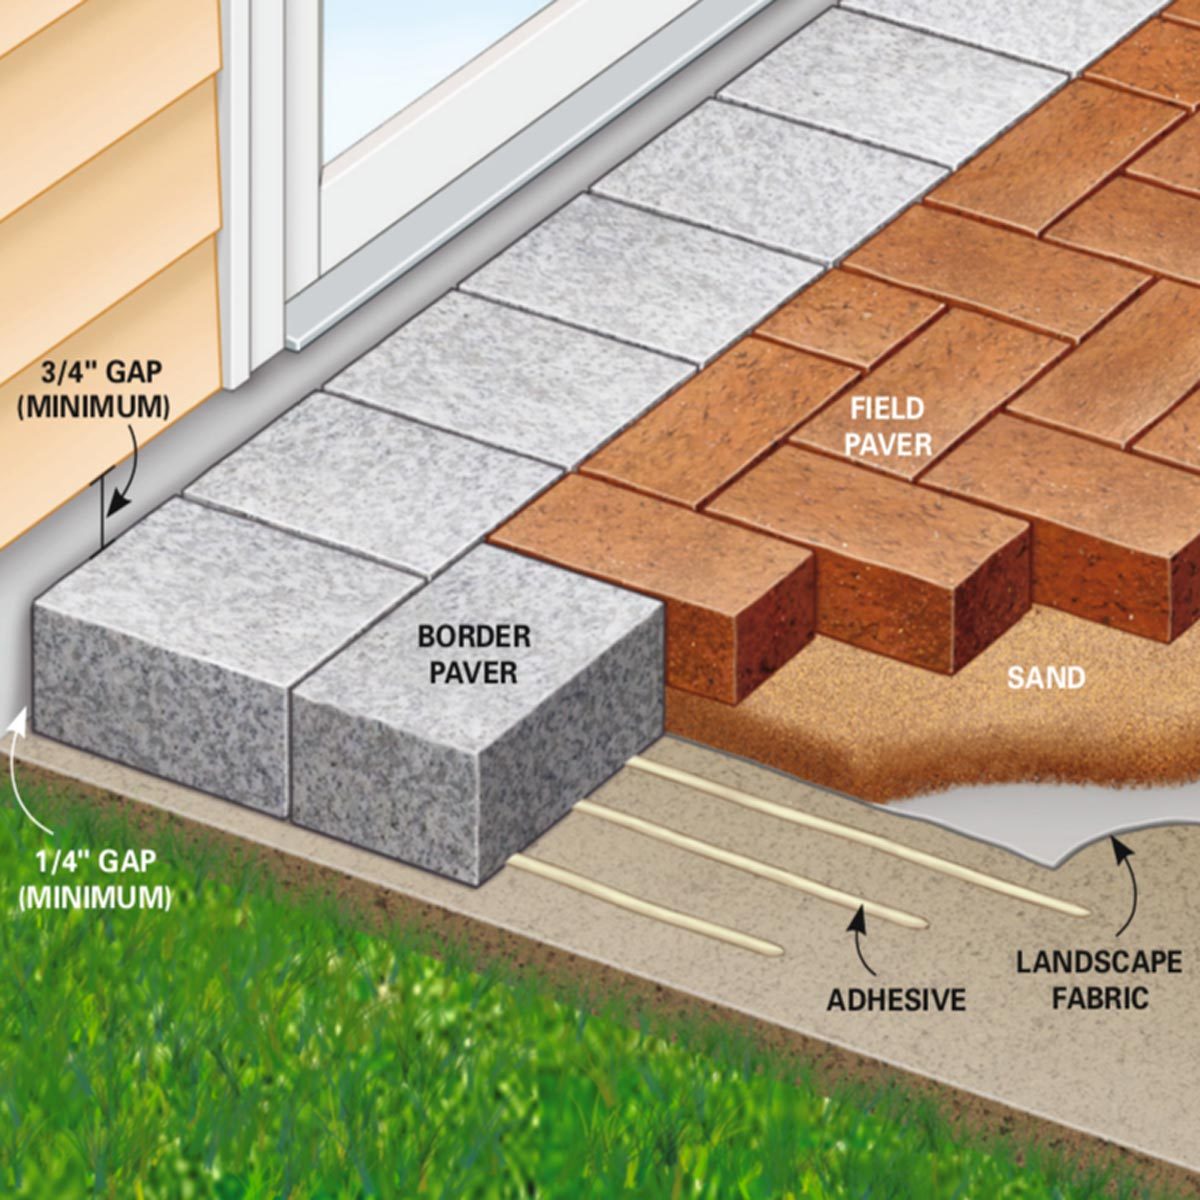 How to Cover a Concrete Patio With Pavers (DIY) | Family Handyman